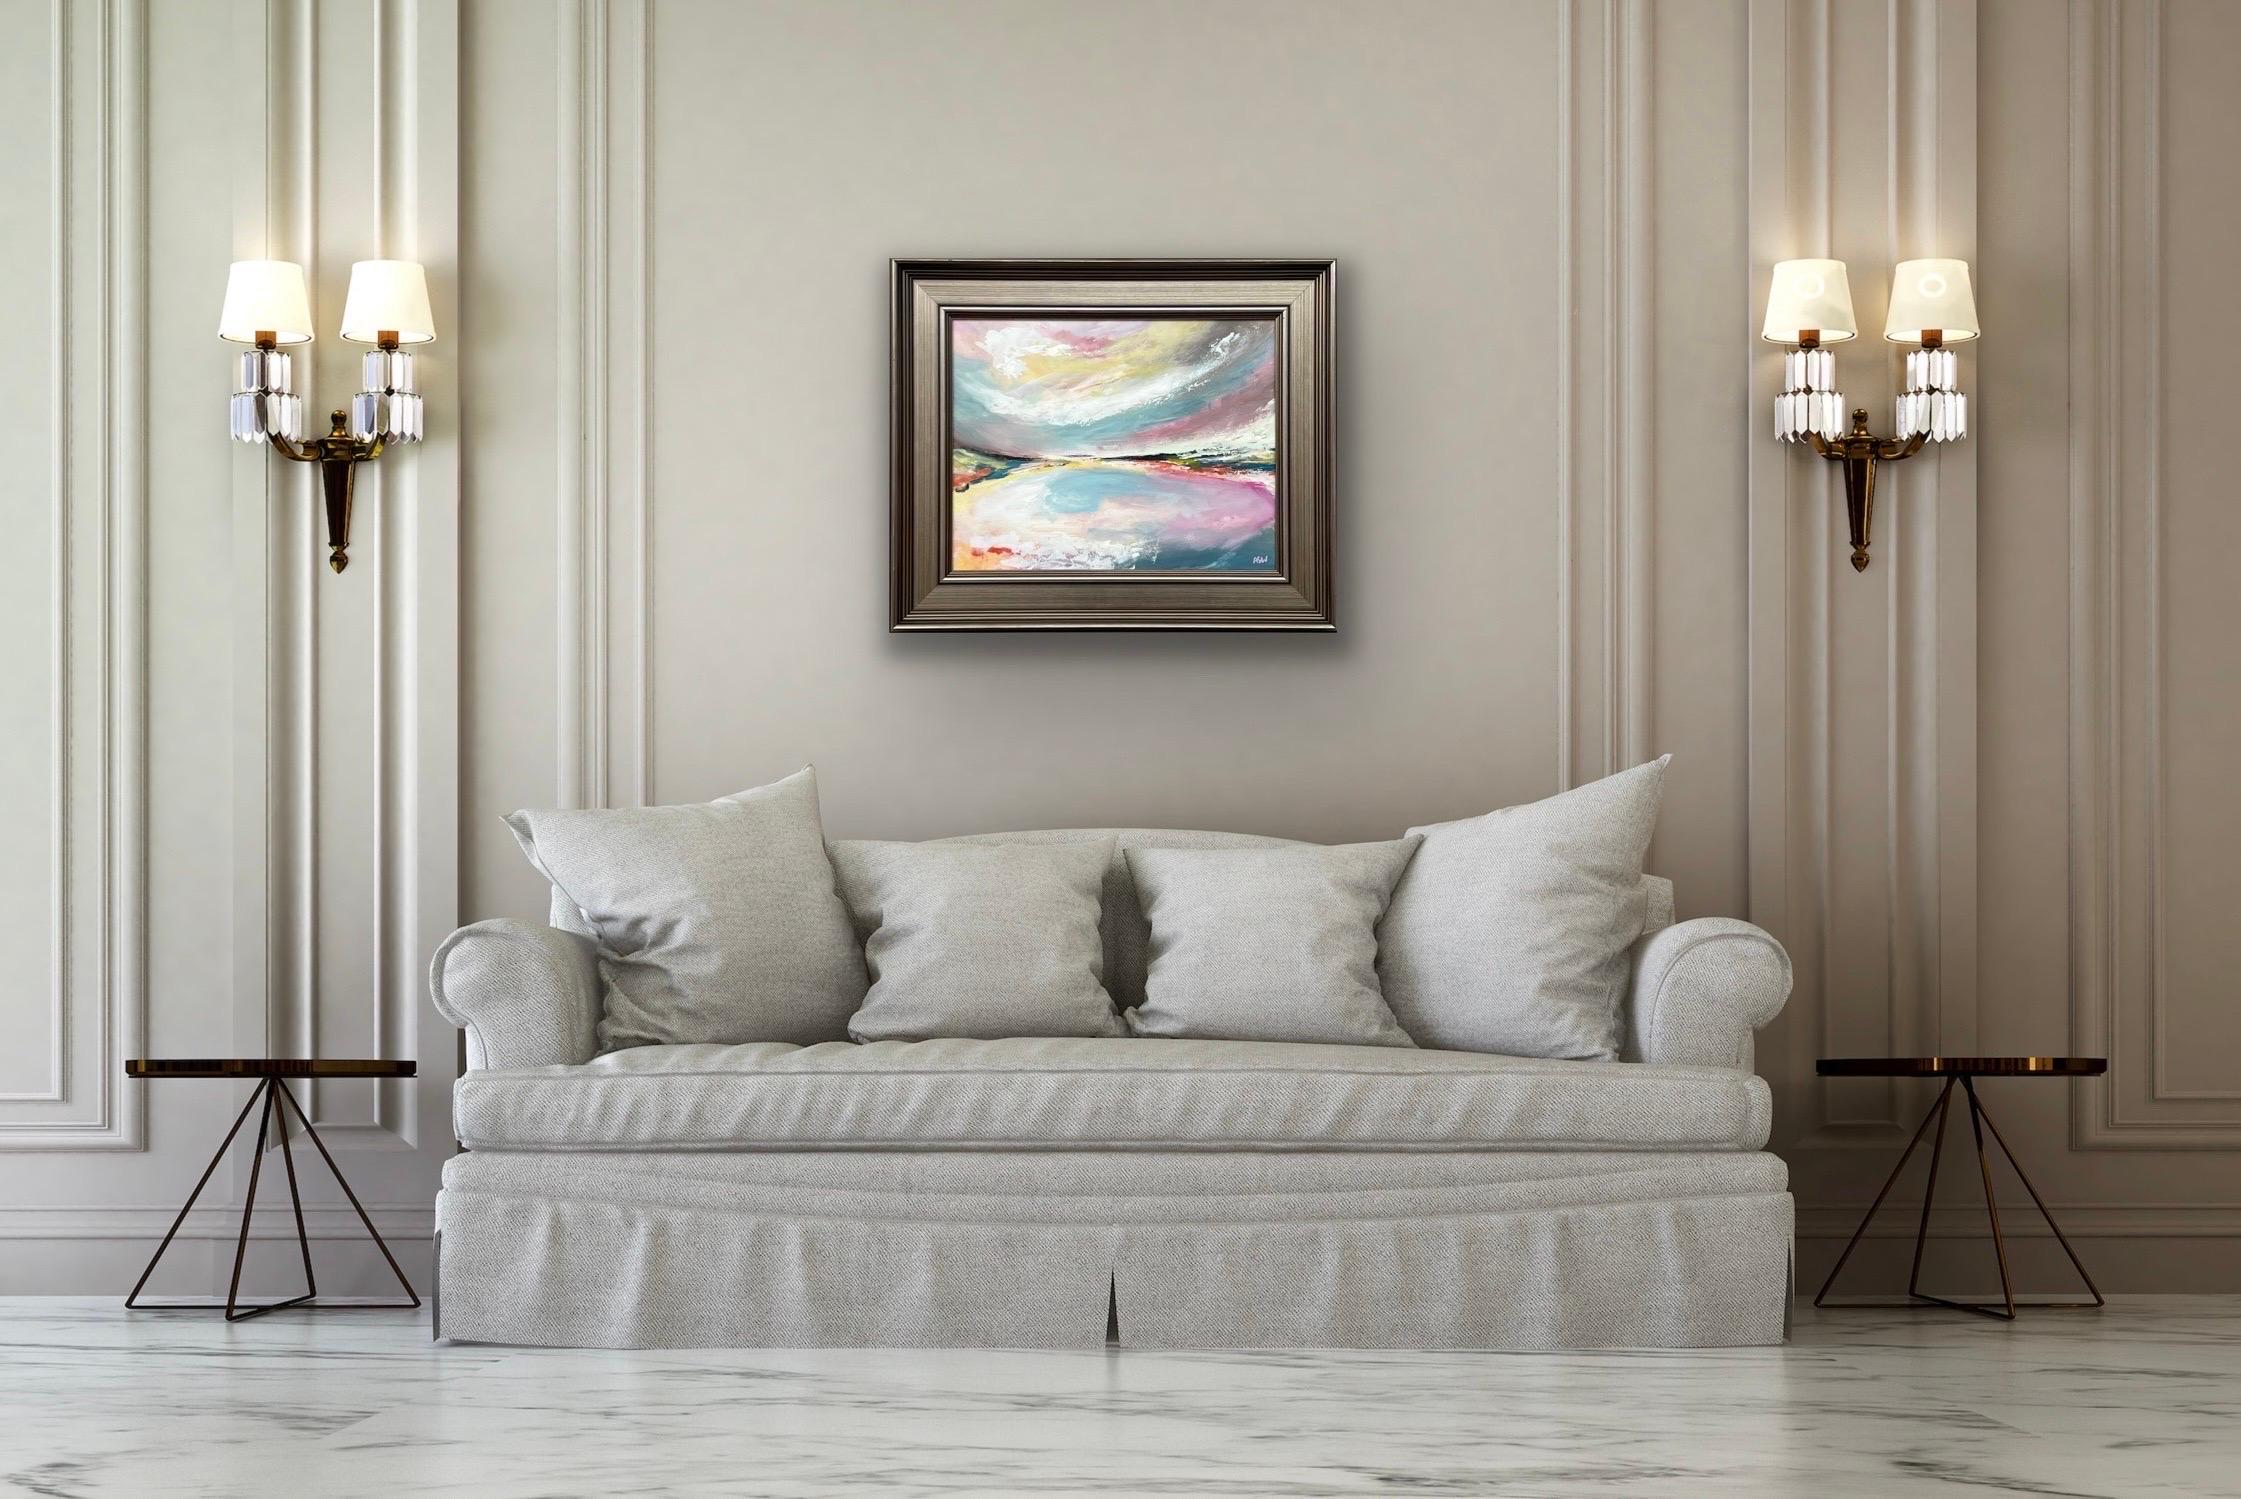 Abstract Landscape Seascape Art with Pink Blue & White Sky by British Painter, Angela Wakefield 

Art measures 18 x 14 inches 
Frame measures 24 x 20 inches 

Angela Wakefield has twice been on the front cover of ‘Art of England’ and featured in